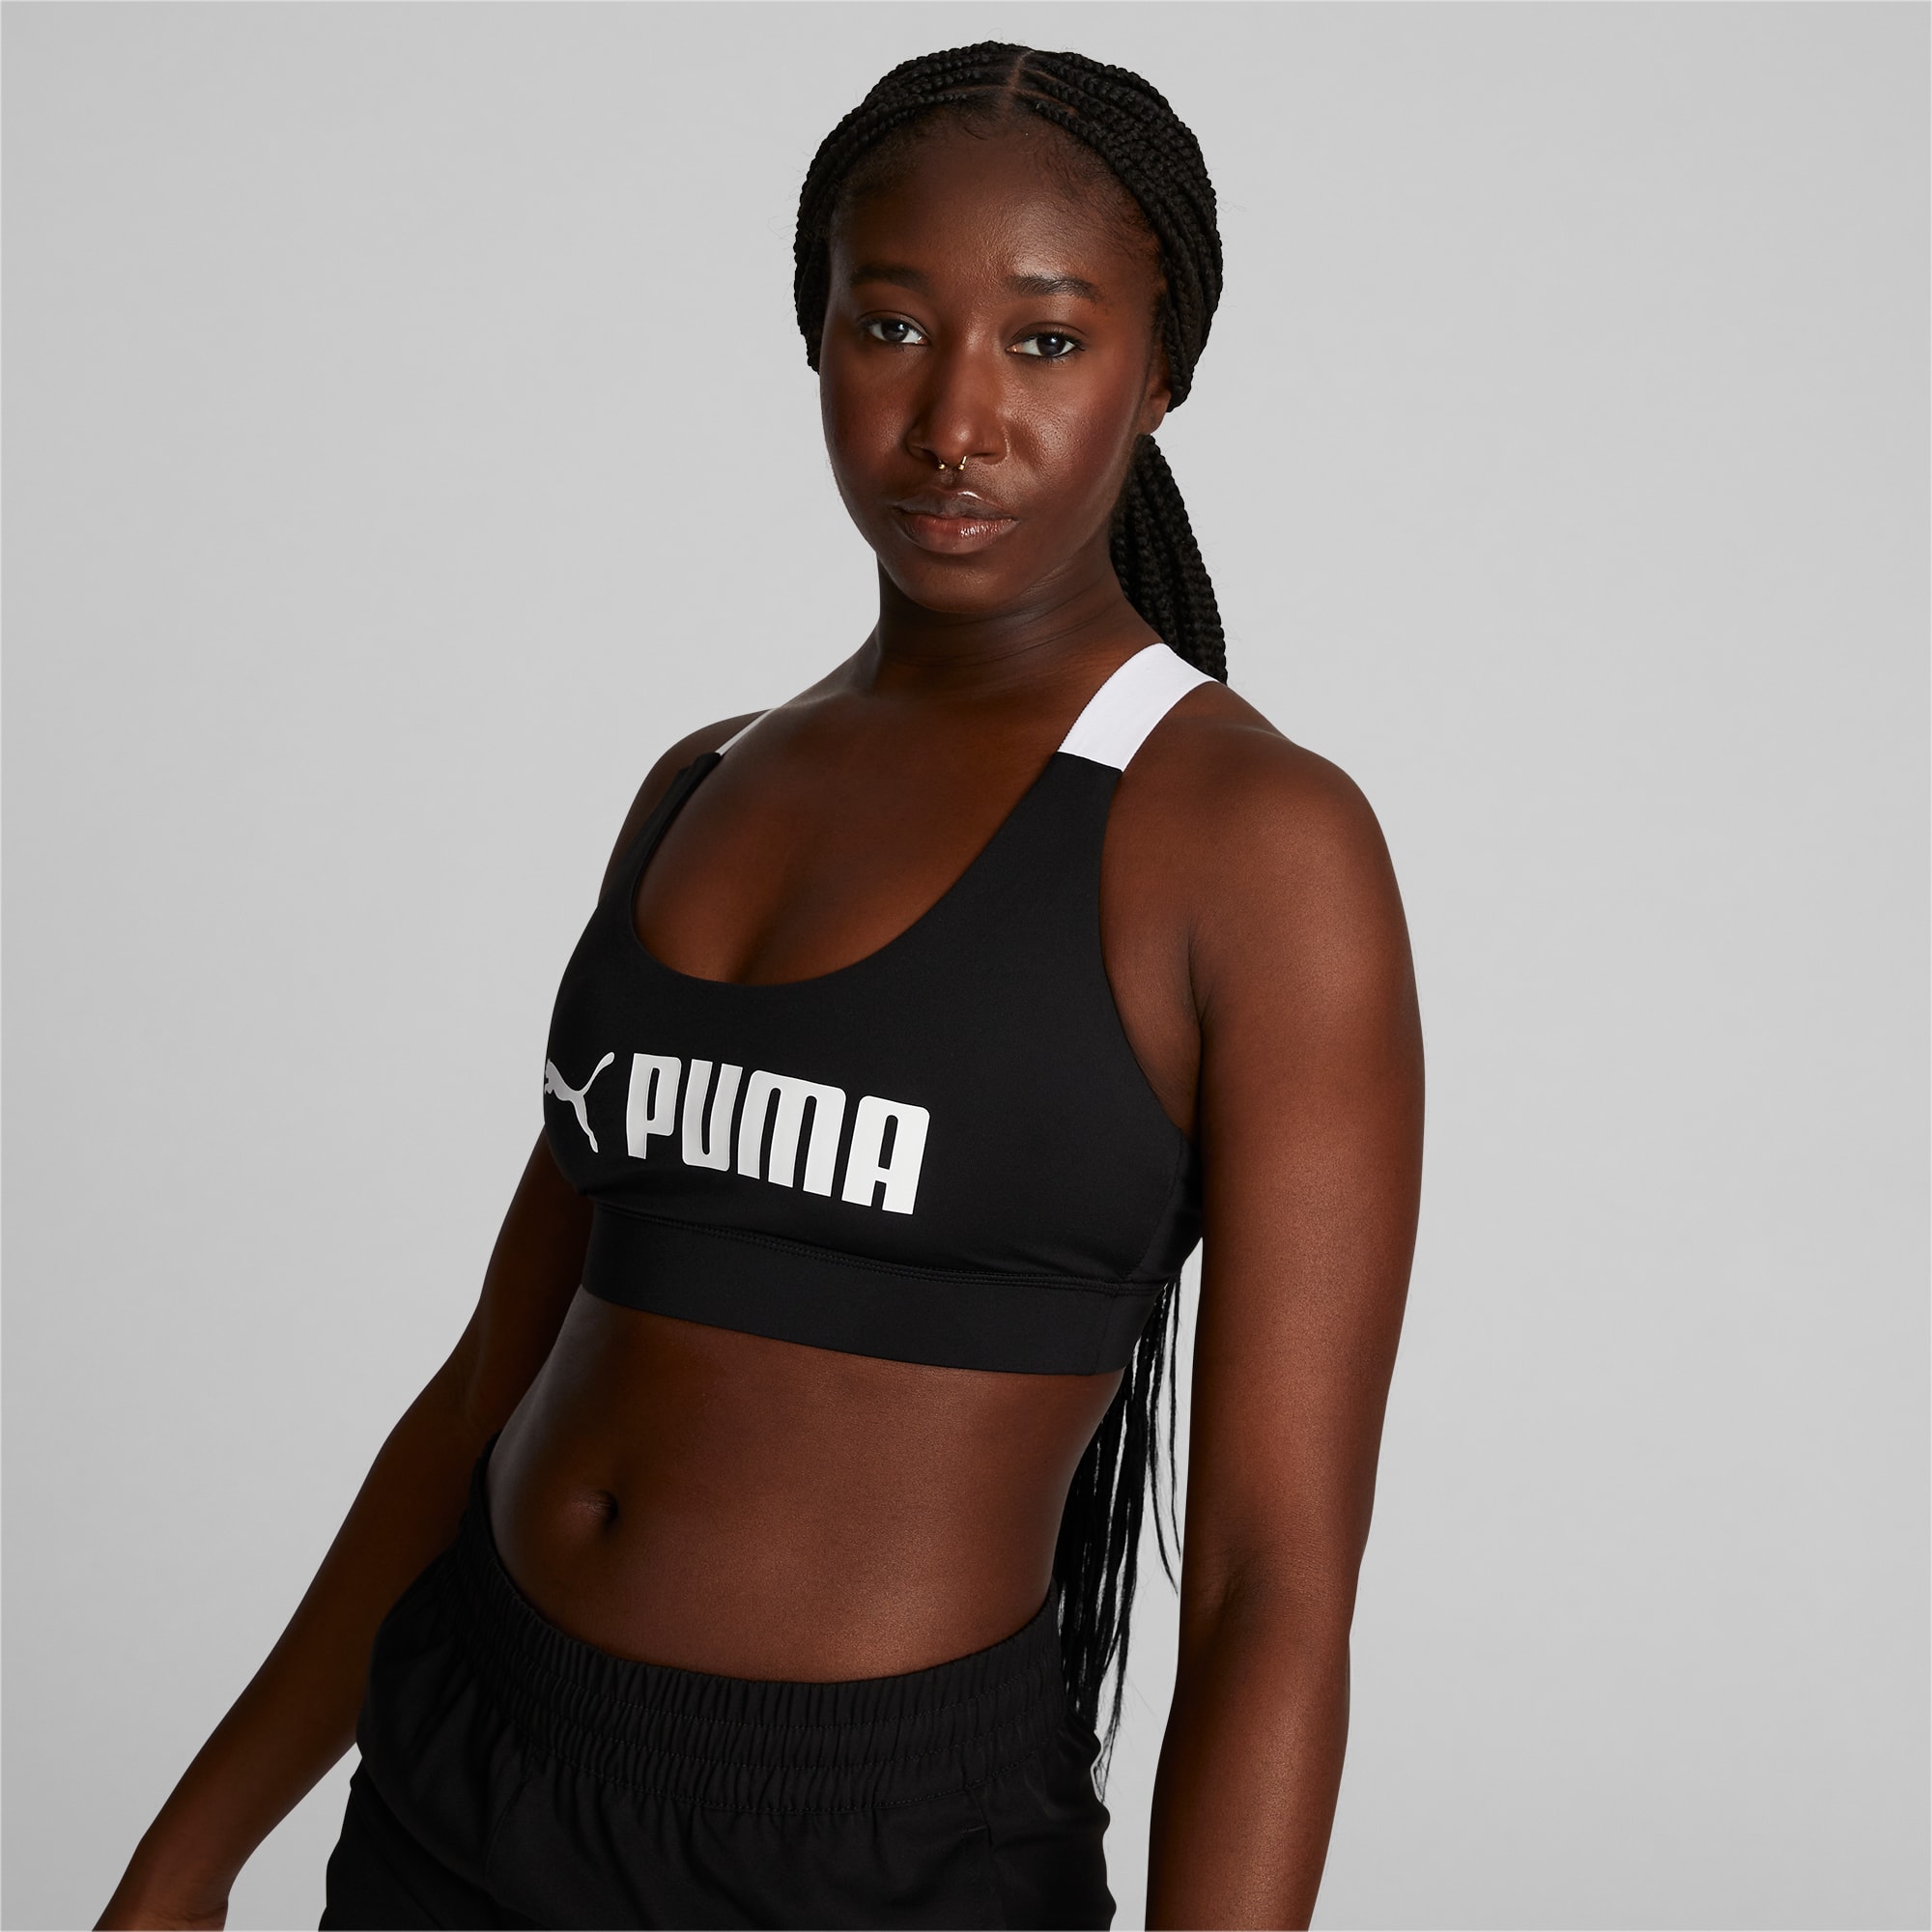 PUMA Womens Removable Cups Racerback Sports Bra 2 Pack